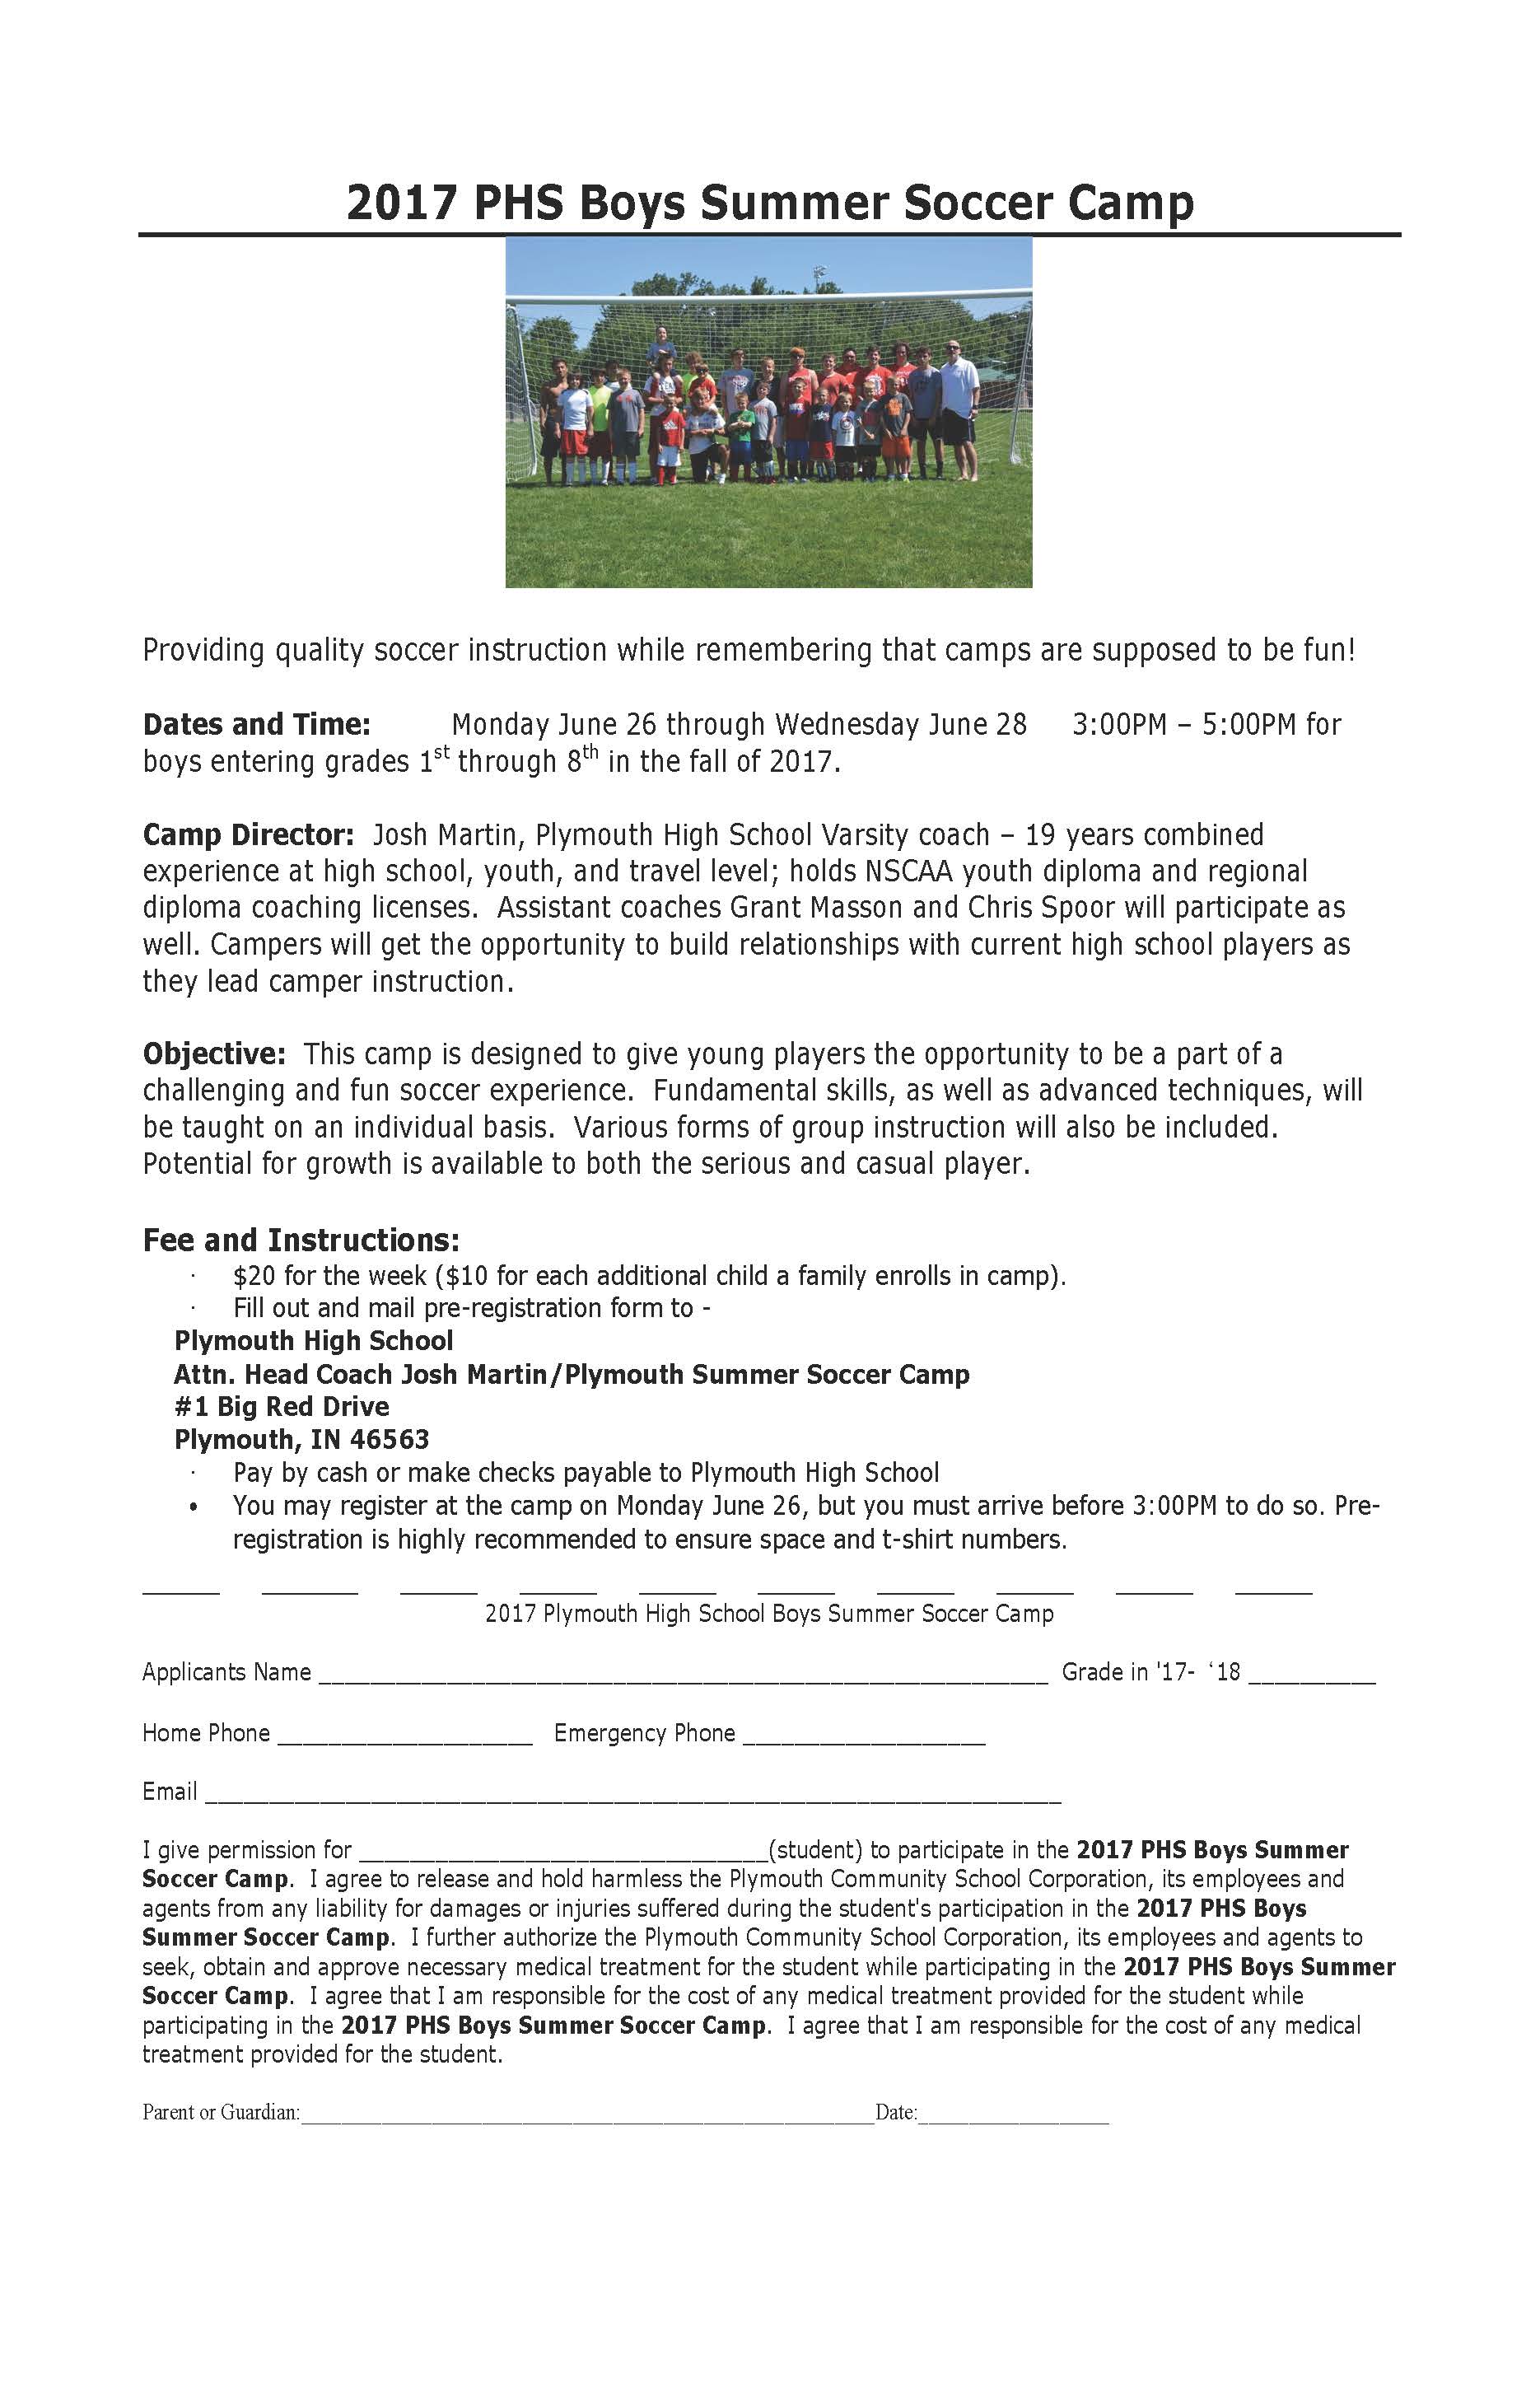 Boys Soccer Camp Flyer in English